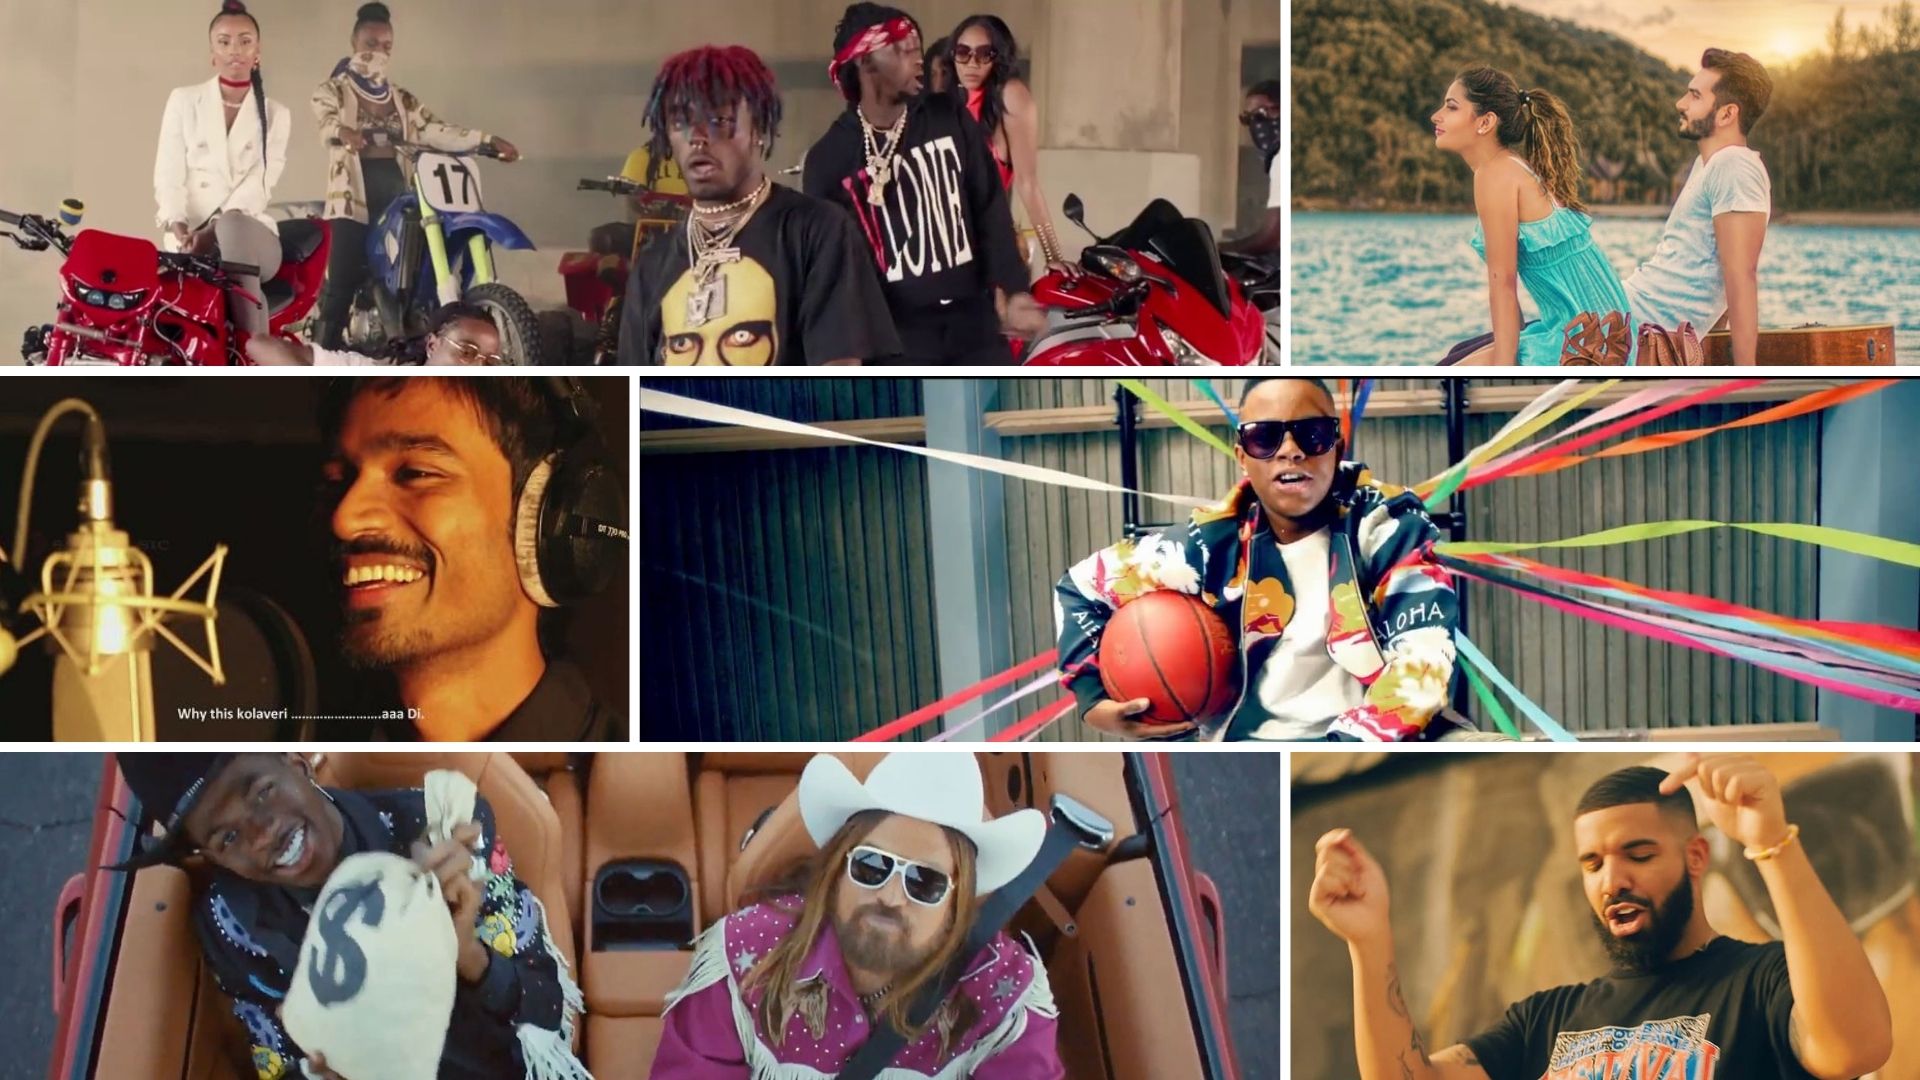 6 Songs That Went Viral Because of Social Media